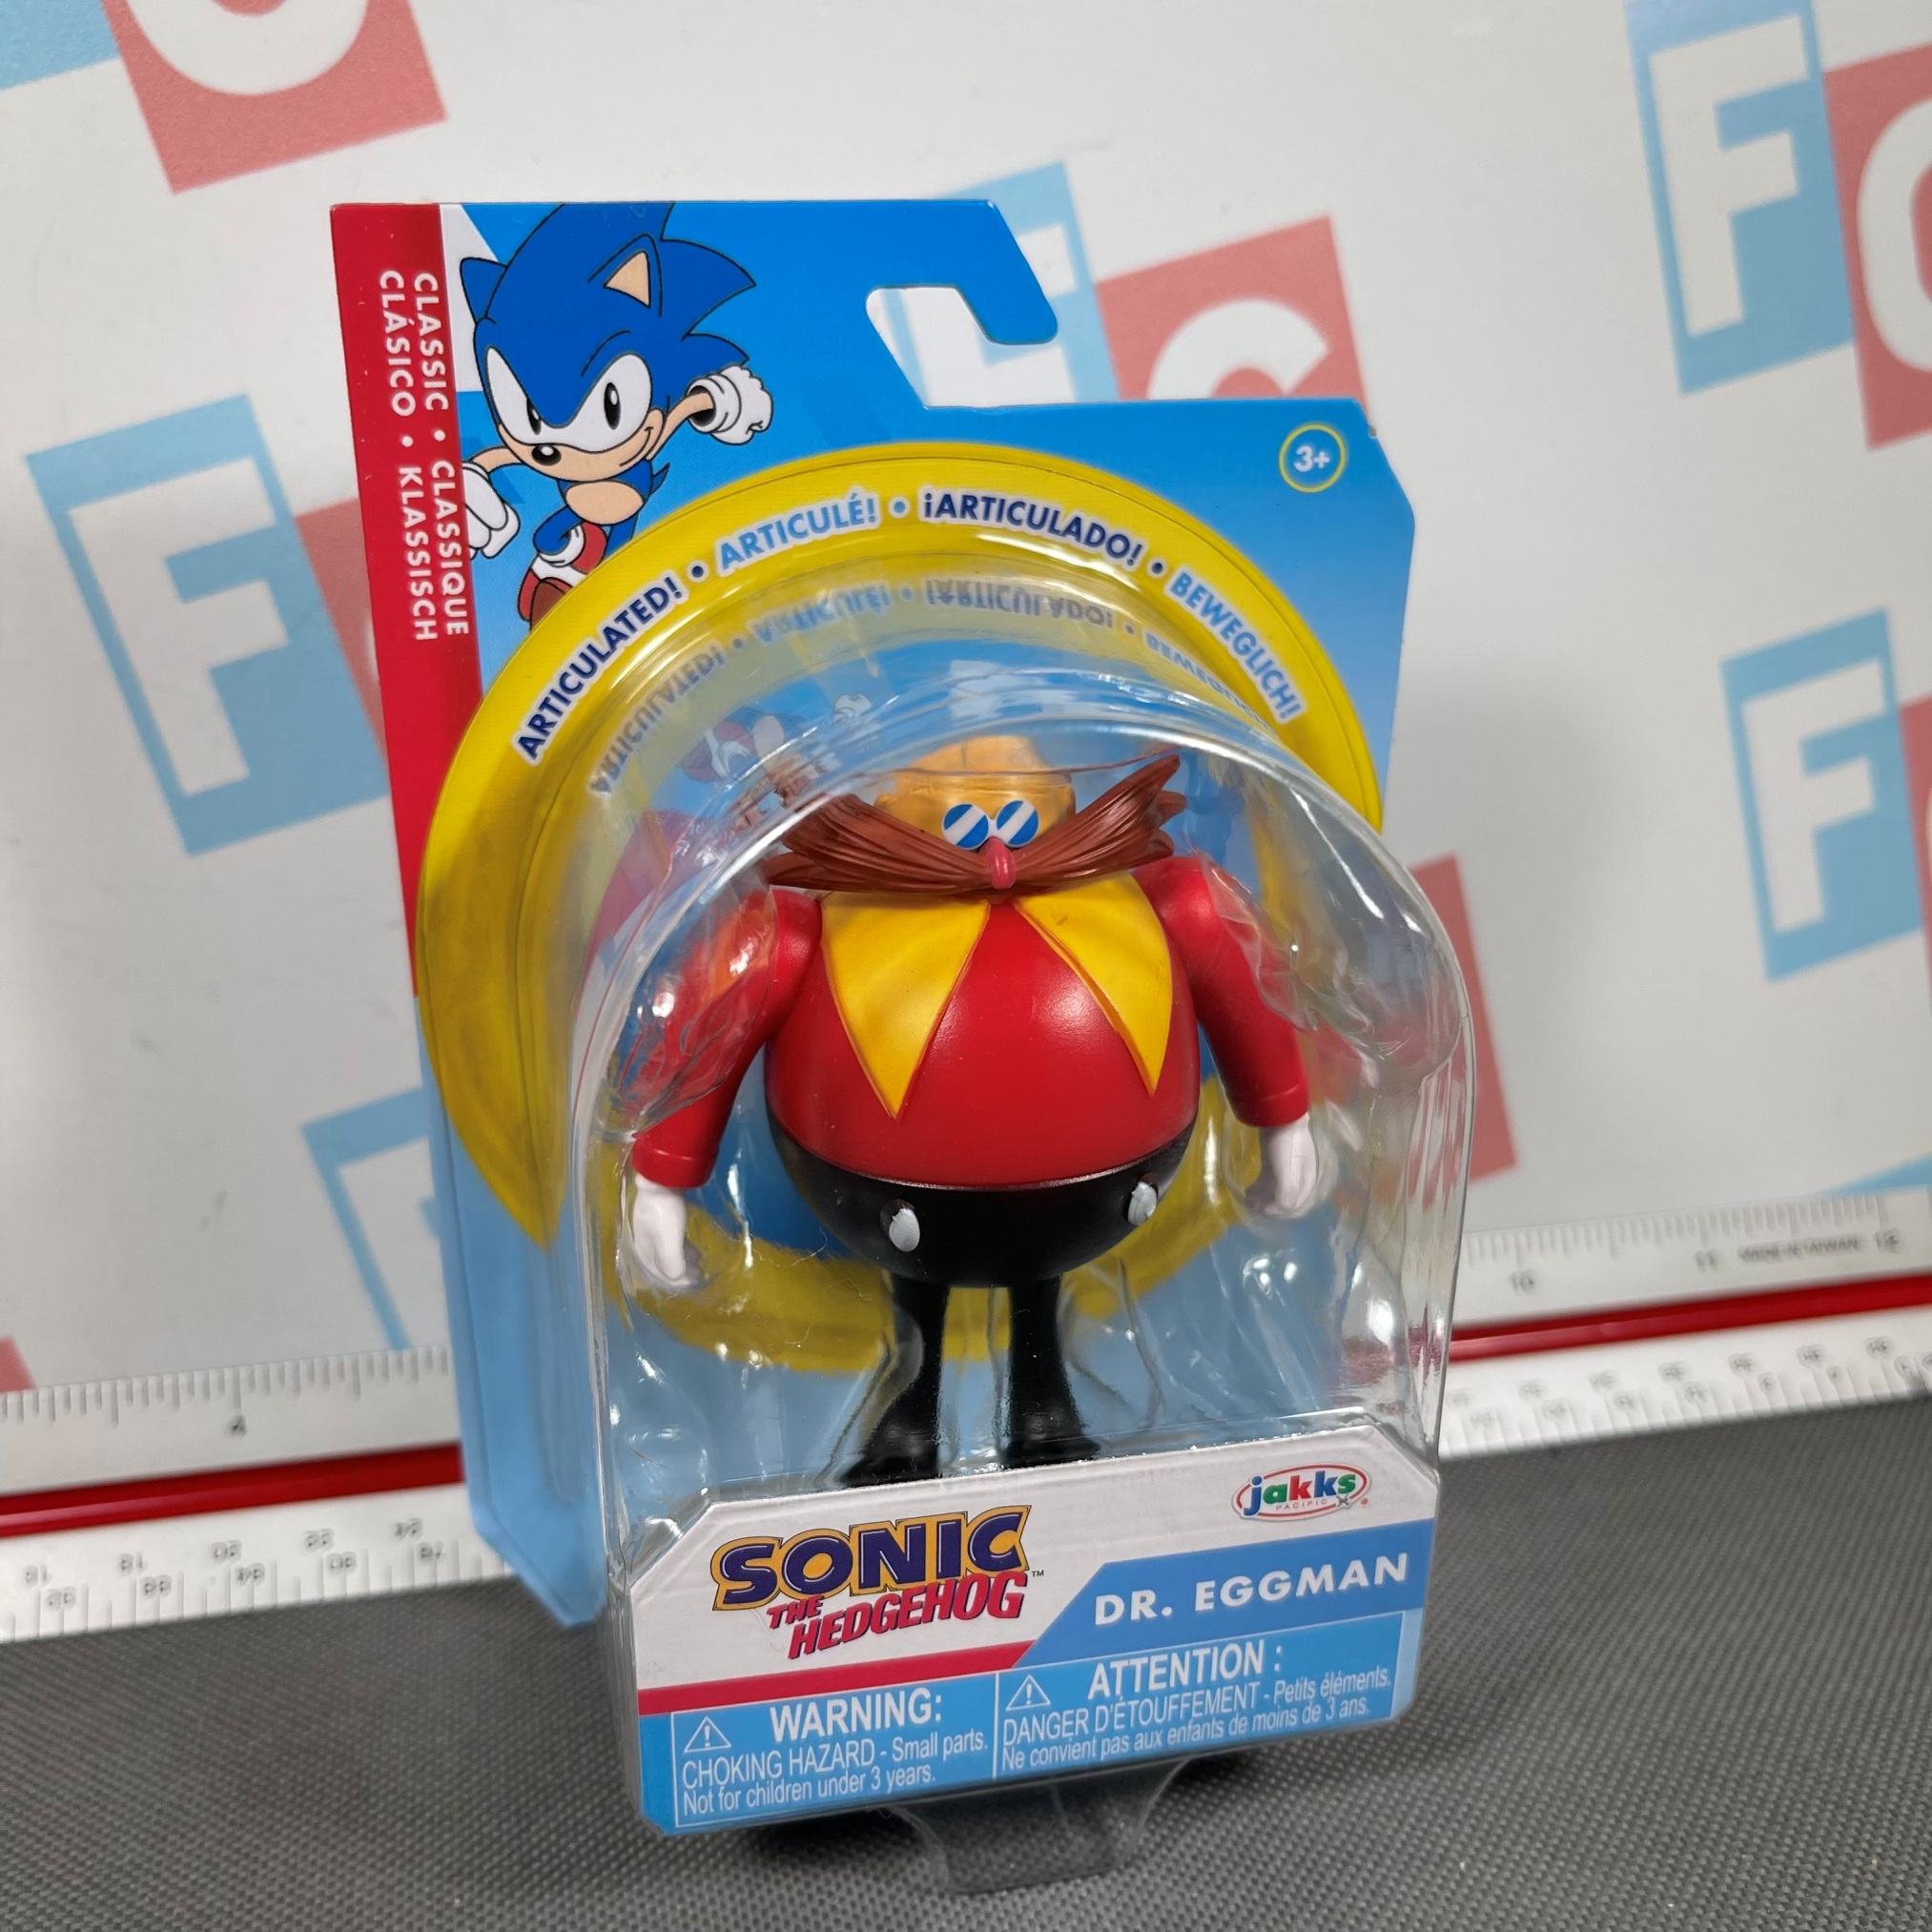 SONIC THE HEDGEHOG 2.5' Tomy Classic Tails Transluscent Figure